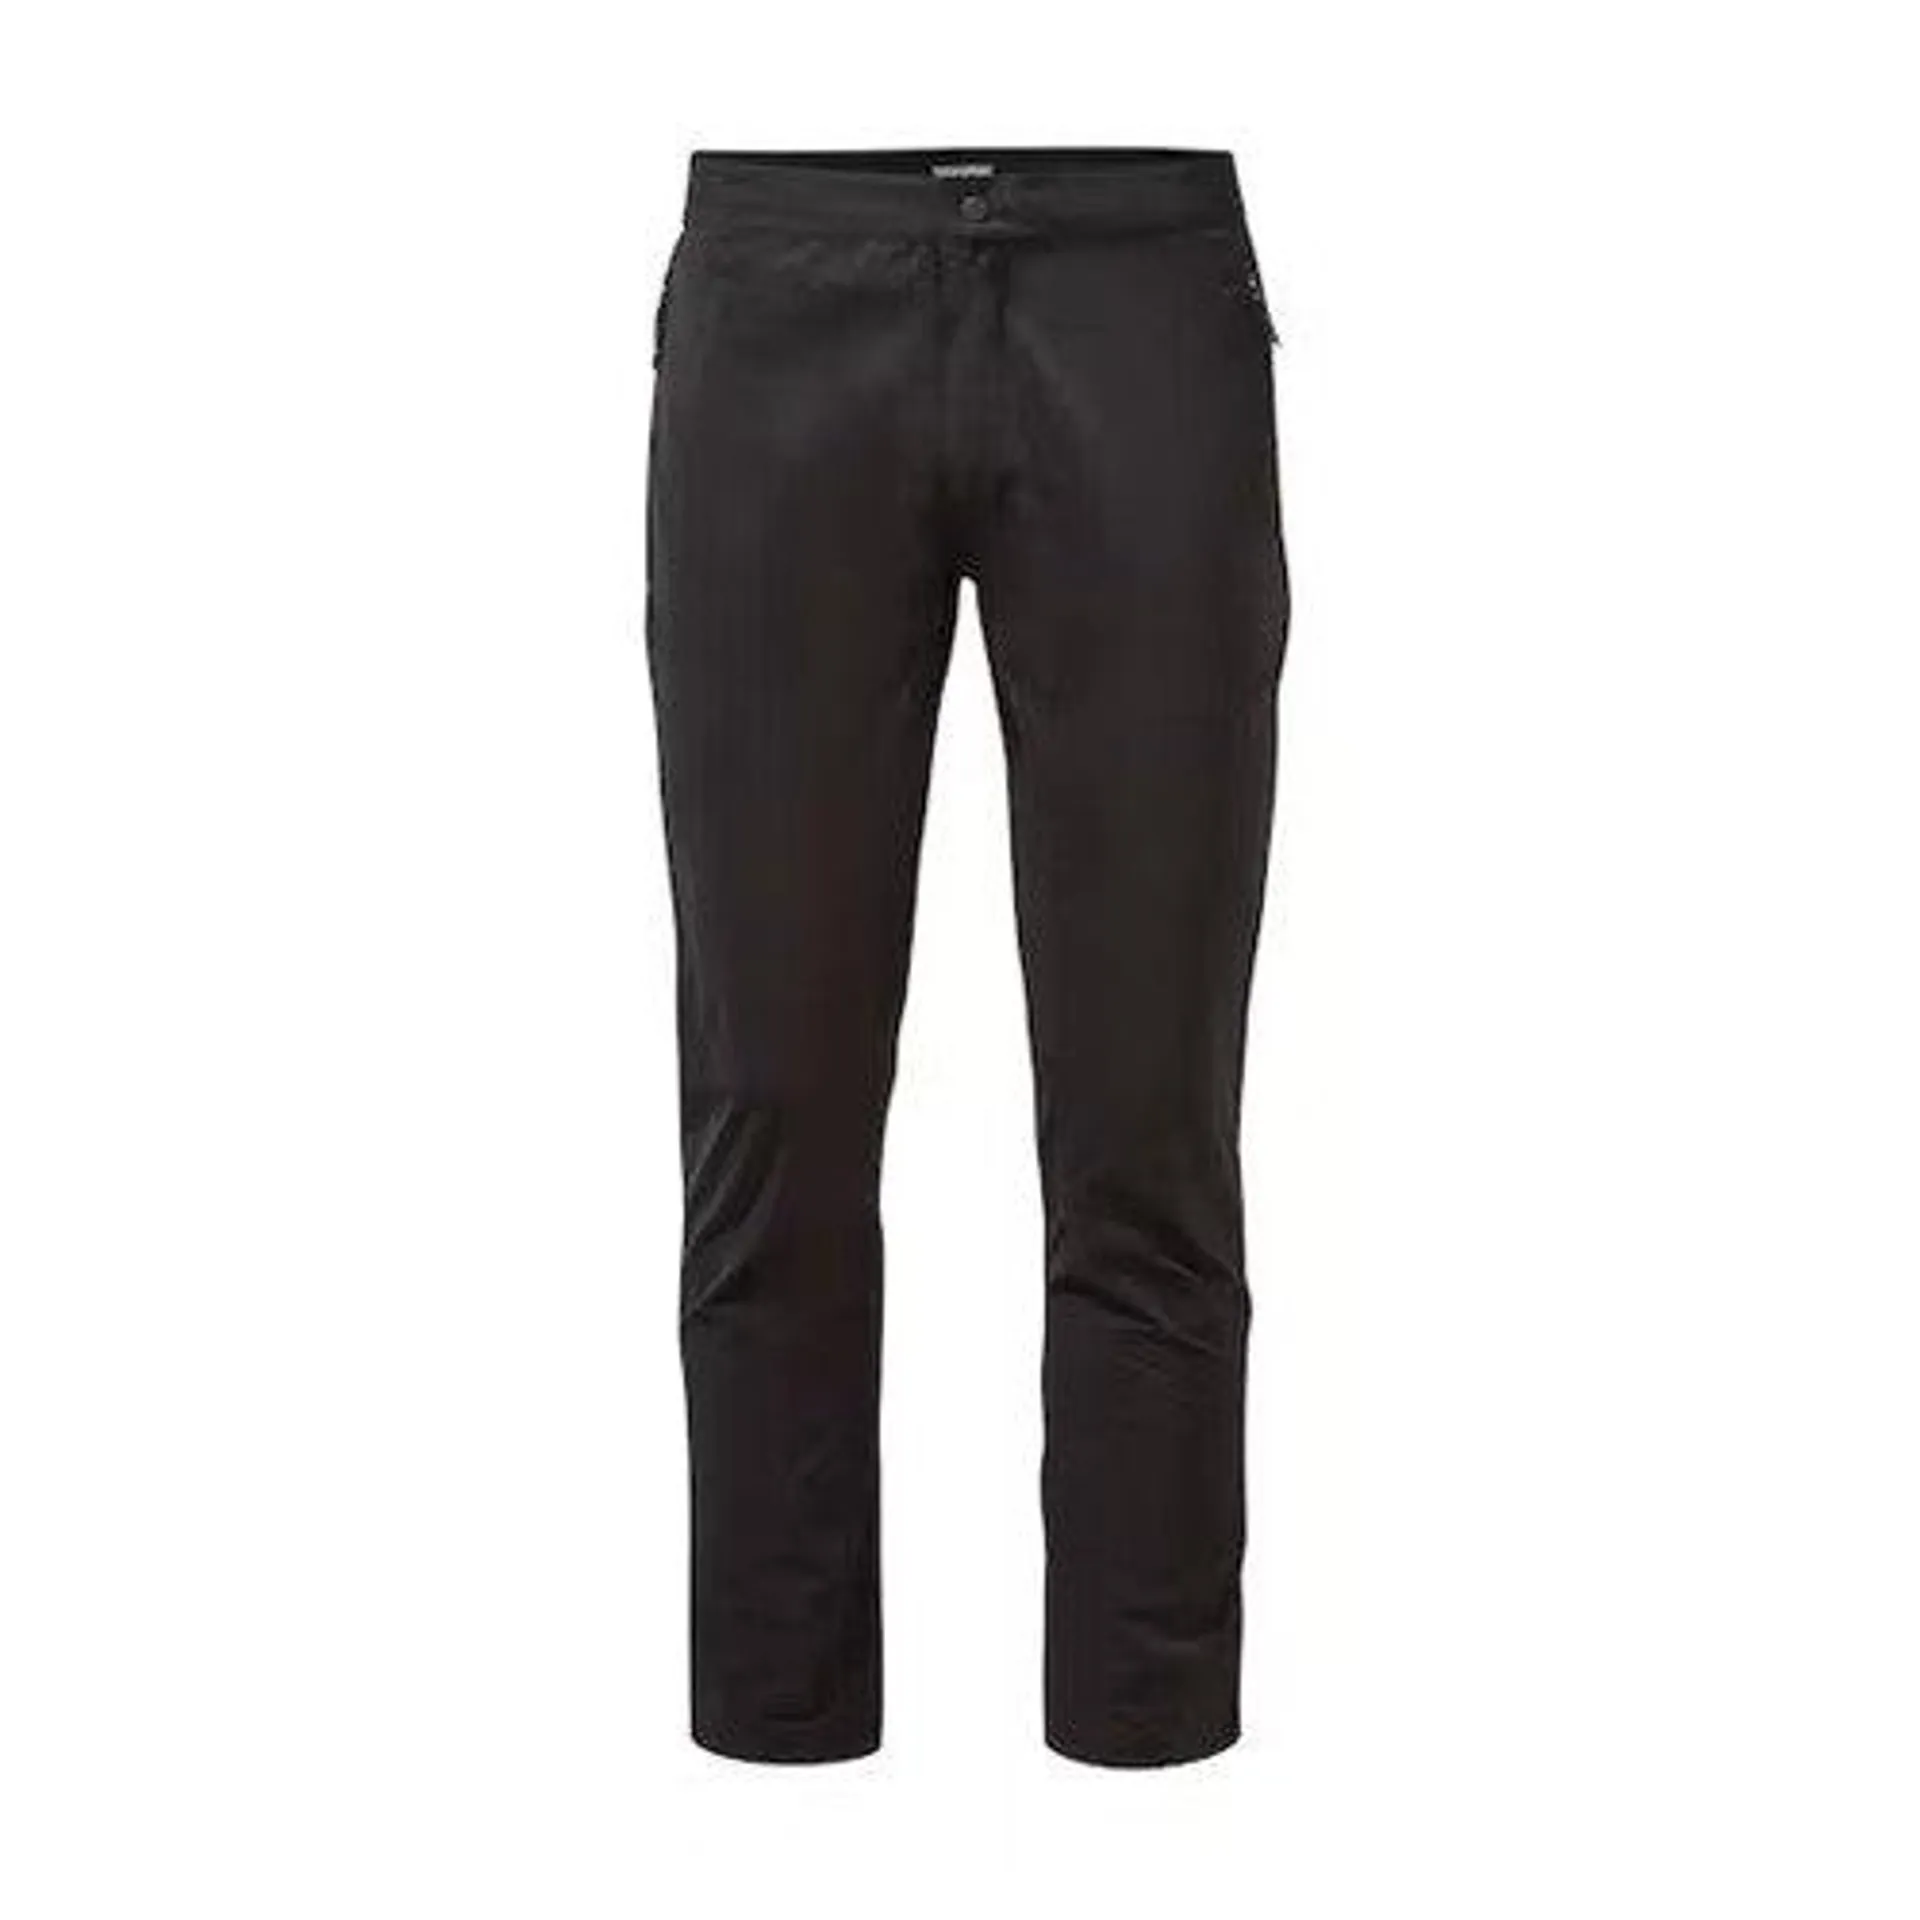 Craghoppers Mens Pro Hiking Trousers